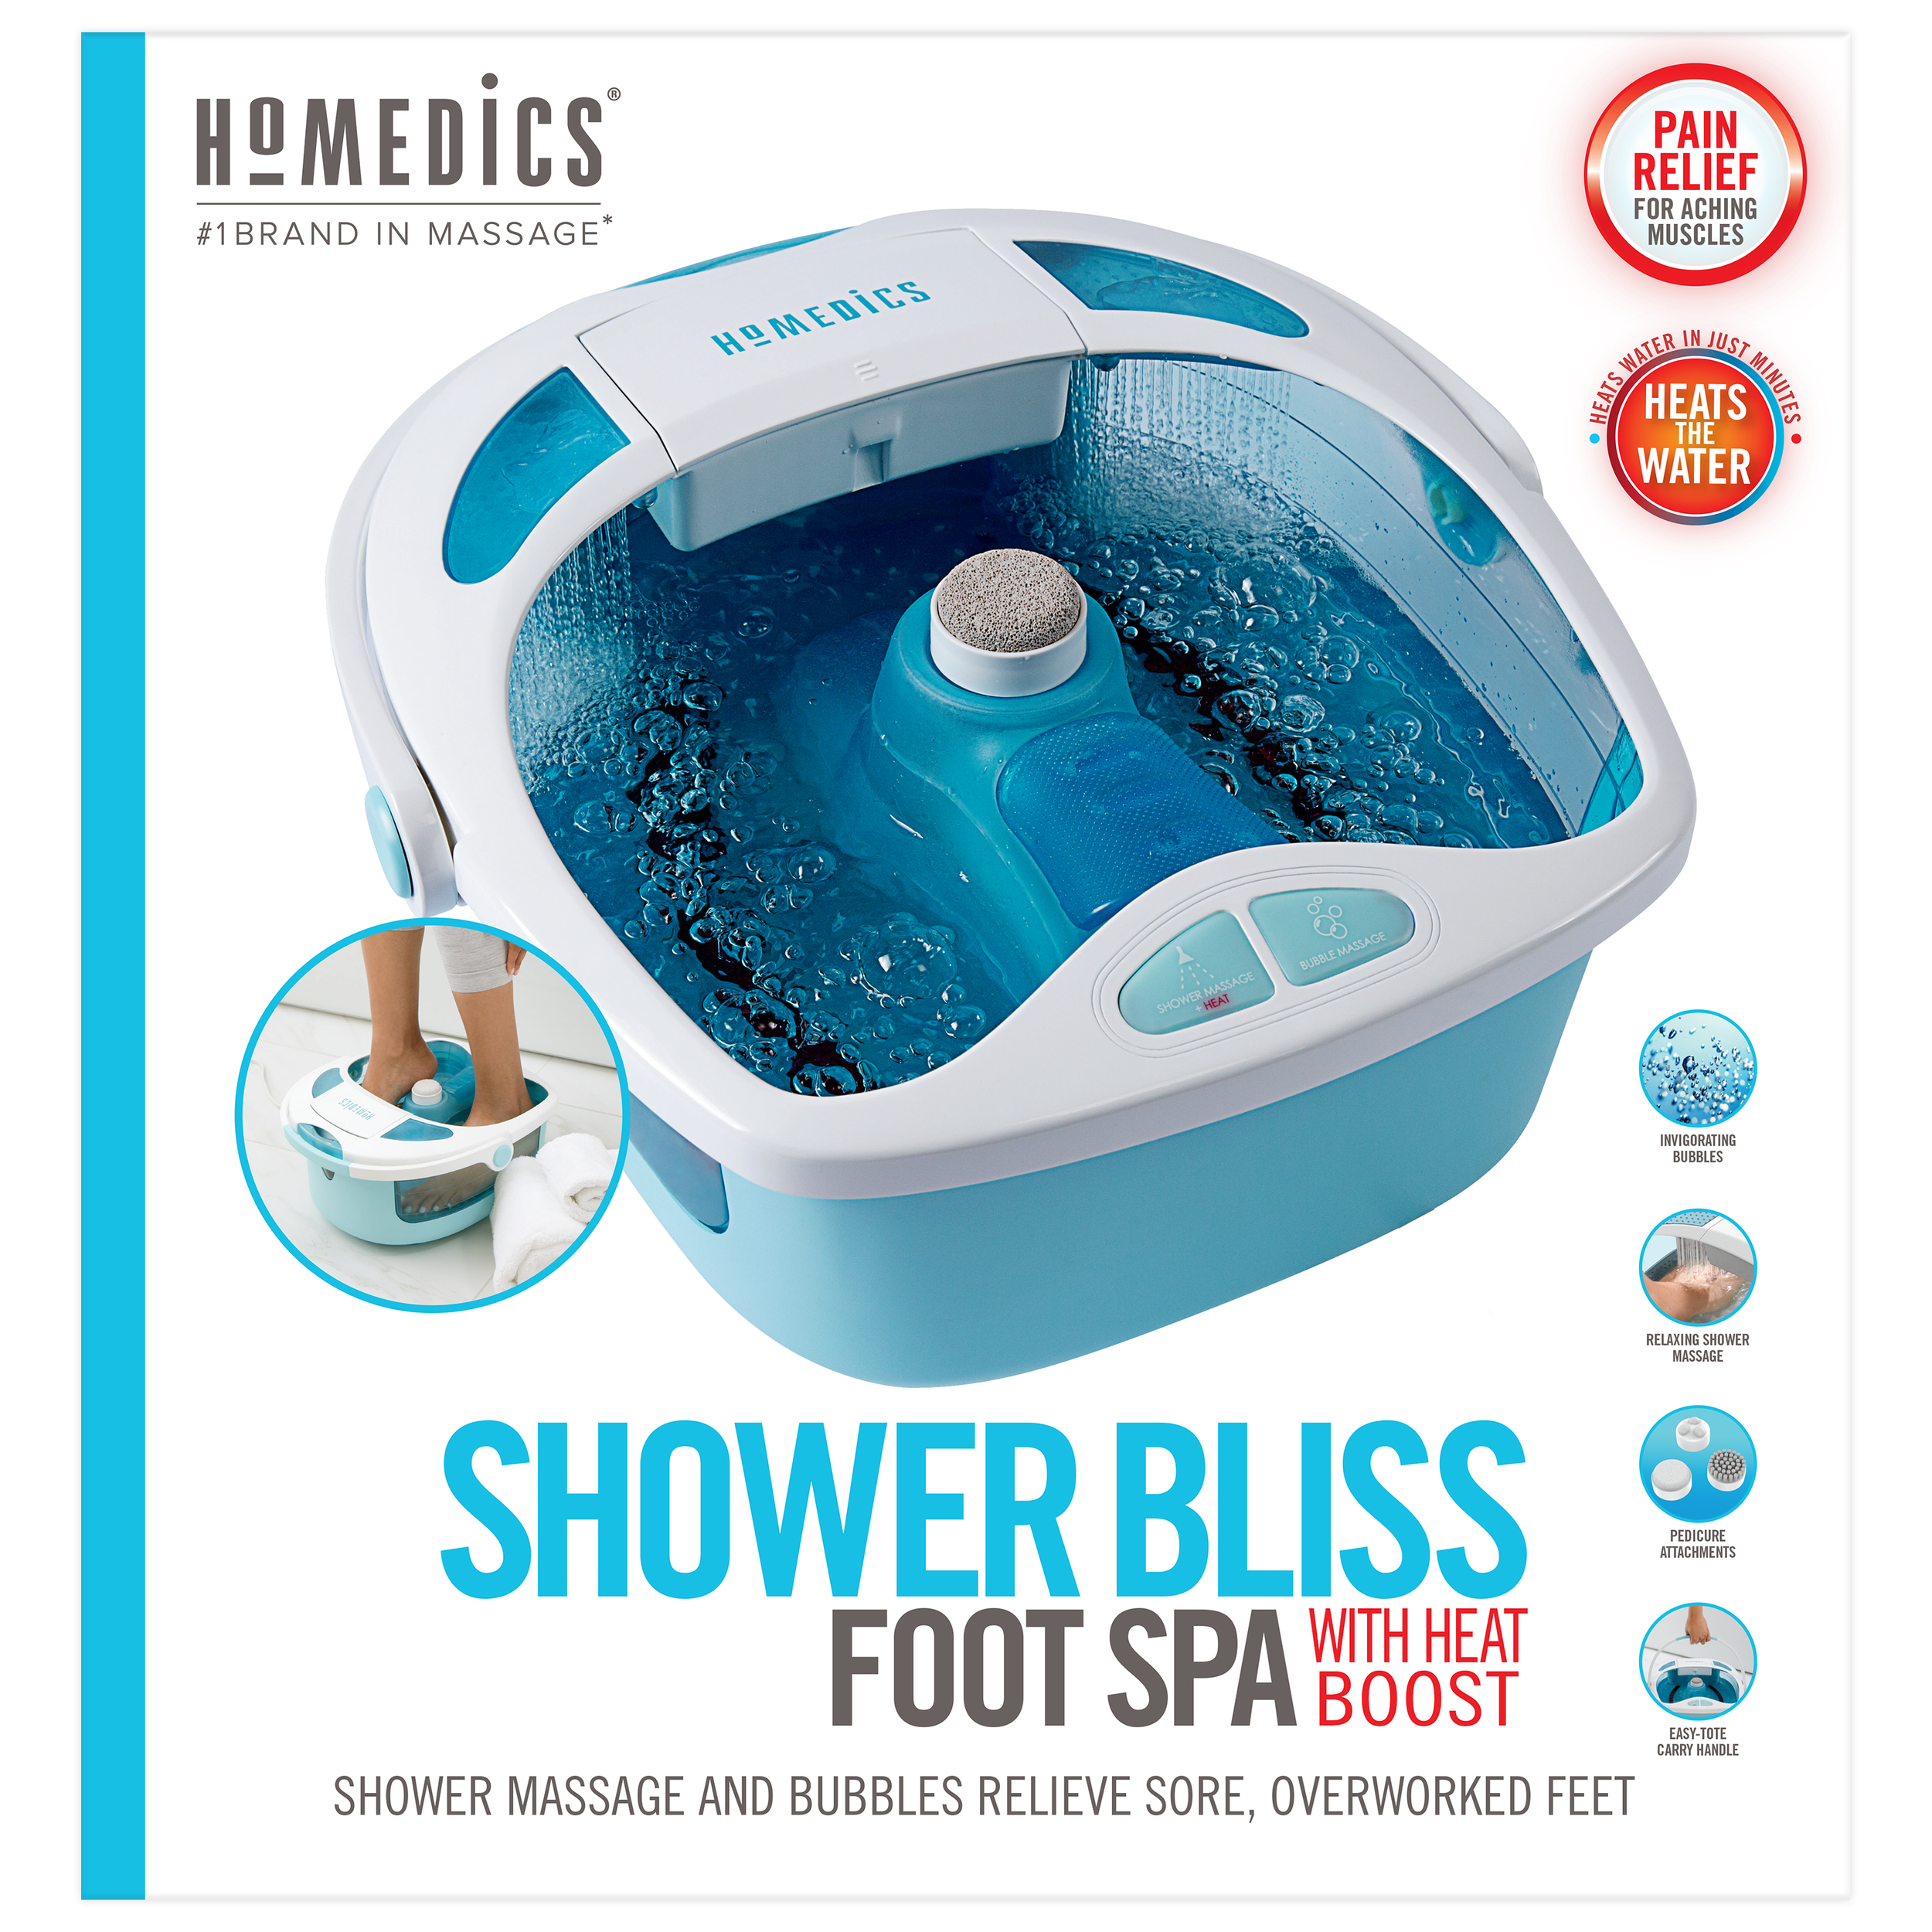 Homedics Shower Bliss Footspa with Massaging Water Jets, 3 Attachments and Toe-Touch Controls, FB-625 - image 3 of 18